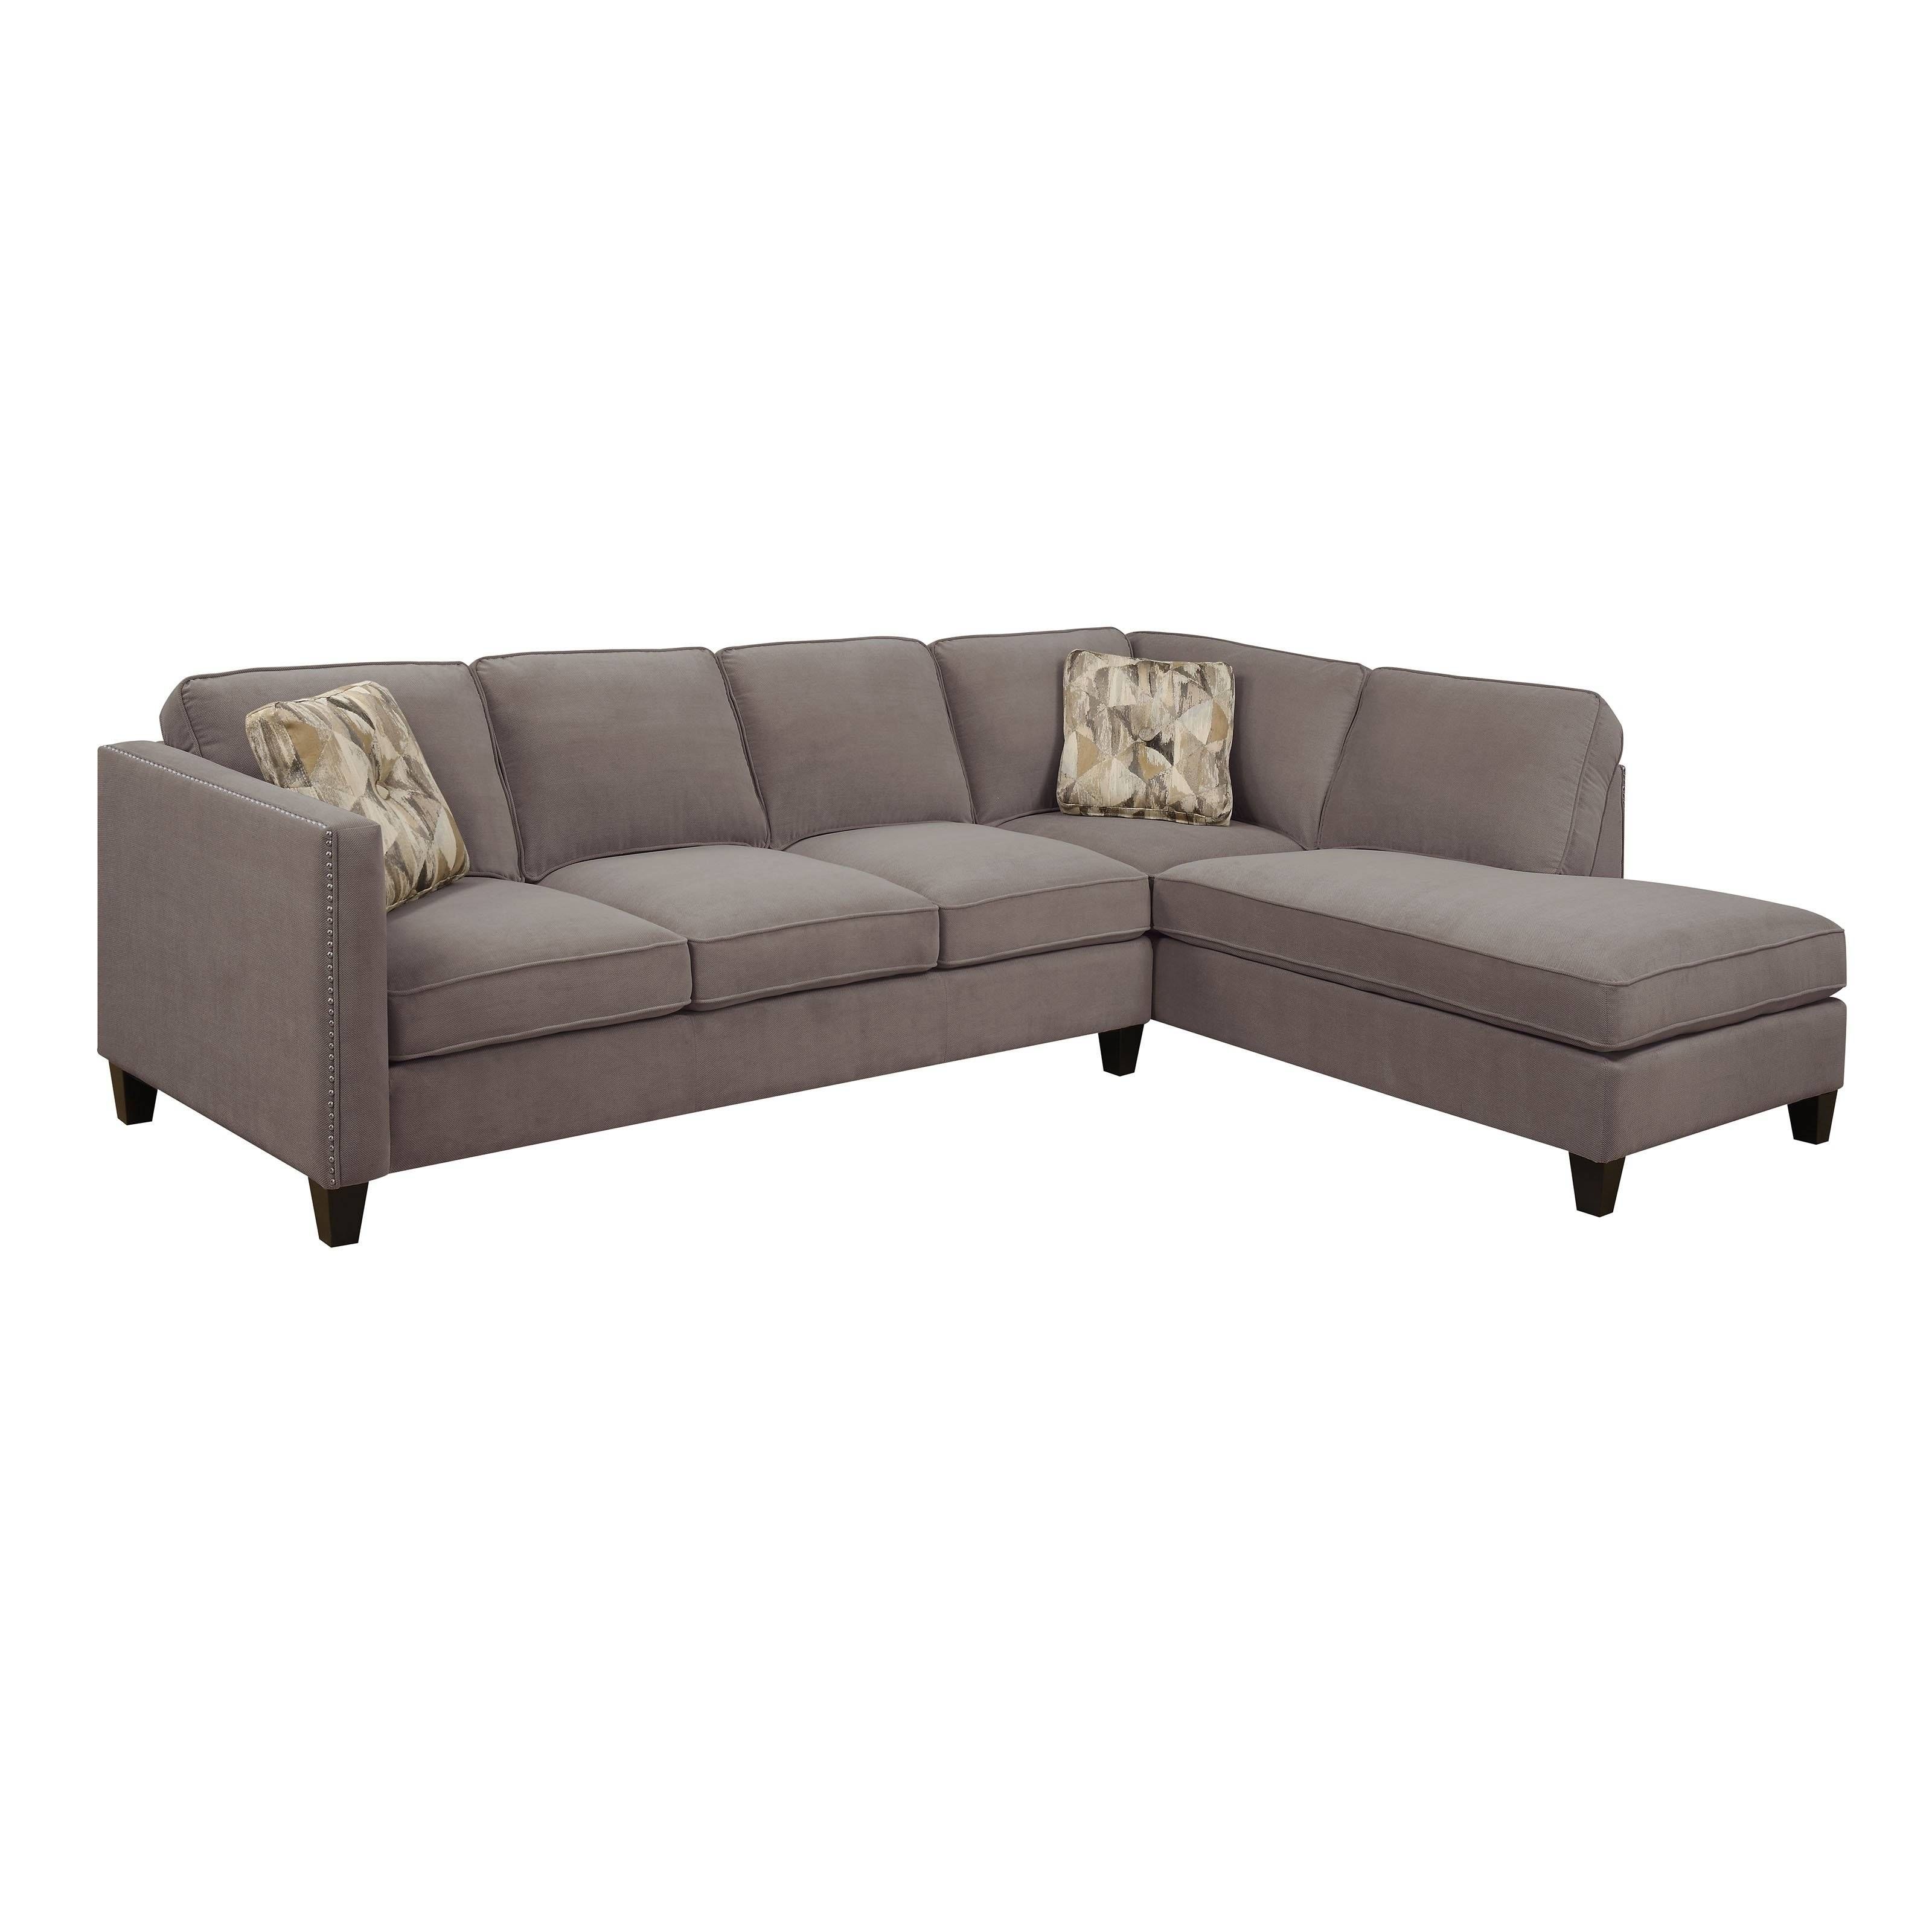 Emerald Home Focus 2 Piece Sectional Sofa With Chaise | Hayneedle Inside Sectional Sofa With 2 Chaises (View 23 of 30)